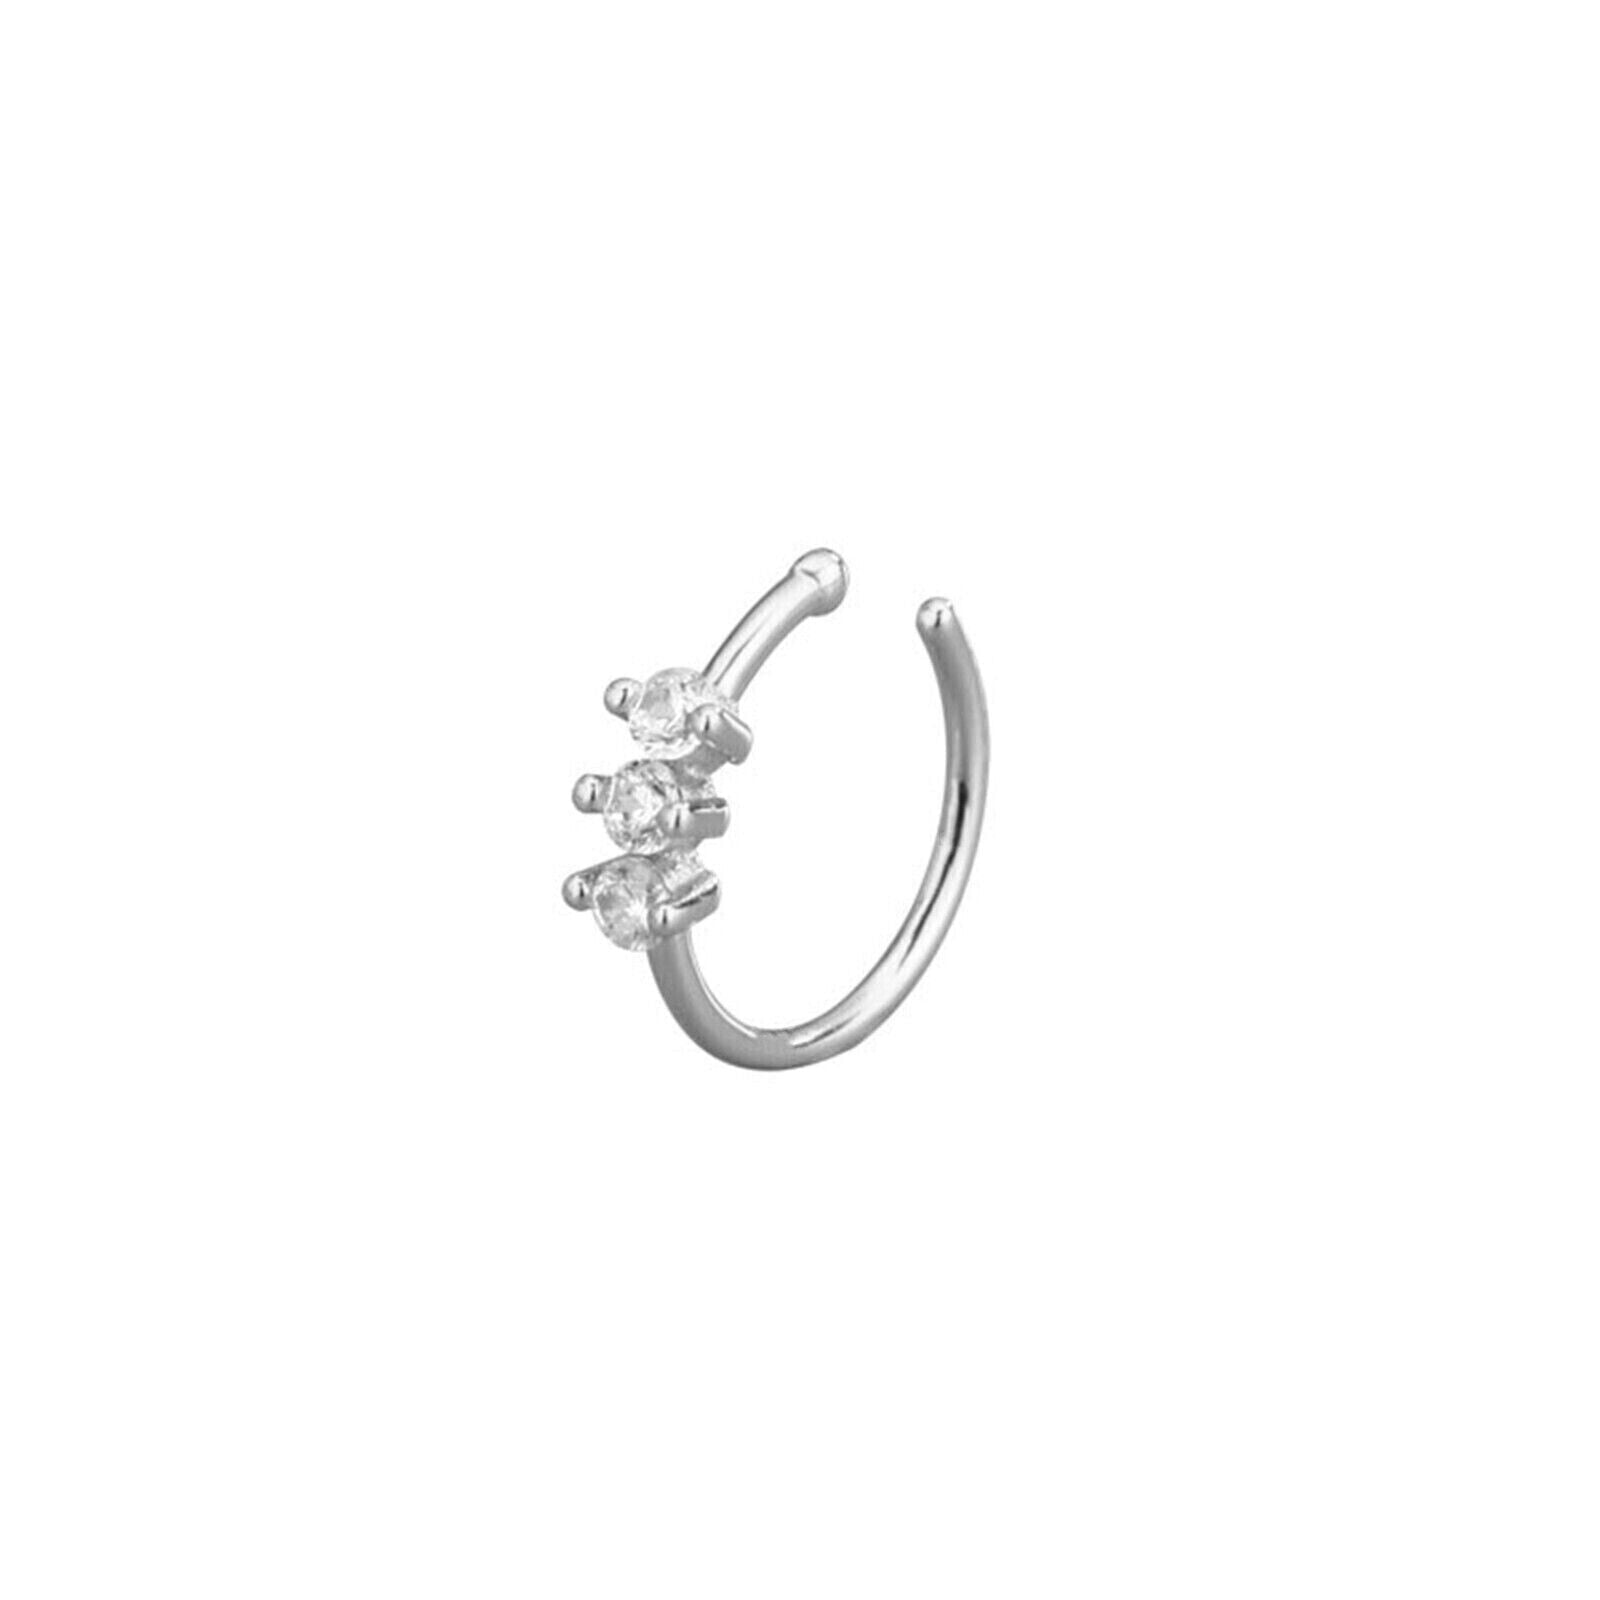 Sterling Silver Nose Ring Nose Hoop Cuff Earings Paved CZ Crystal Flower Three Stones 2 Tones - sugarkittenlondon